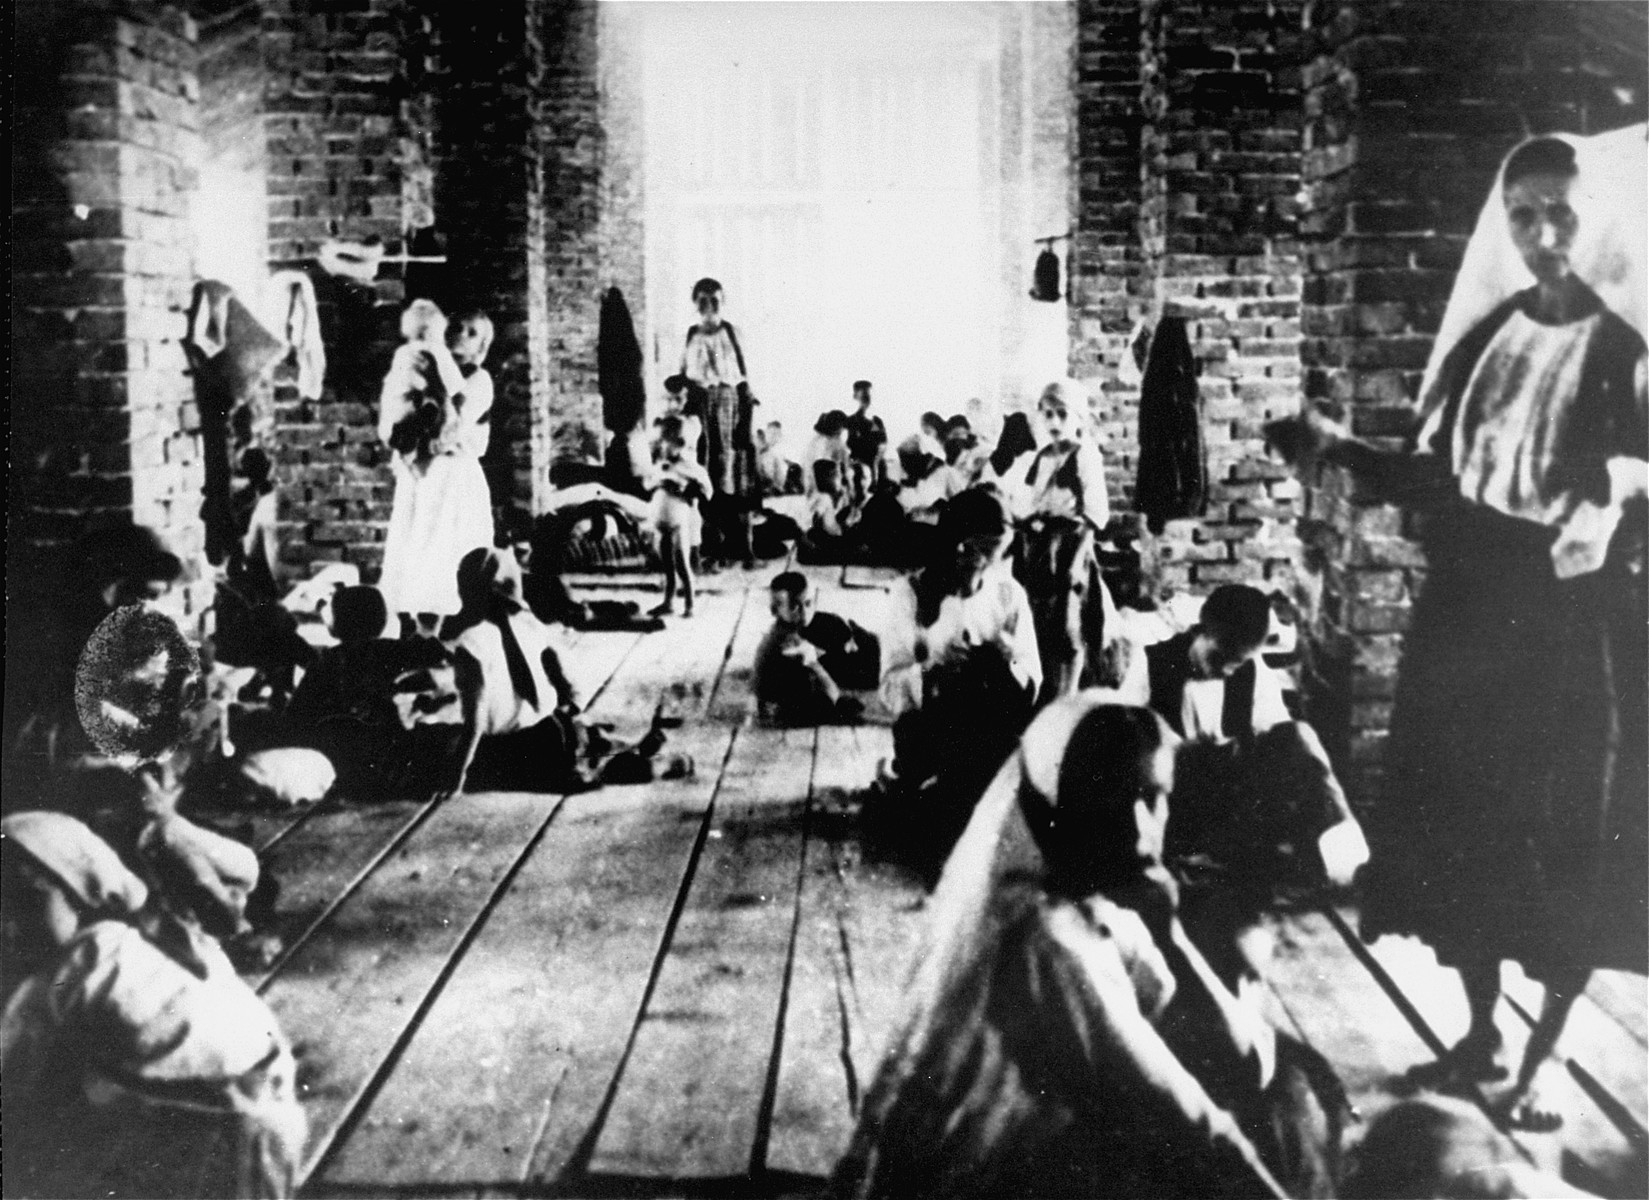 Mothers and children imprisoned in the "Kula" (tower) of the Stara Gradiska concentration camp.